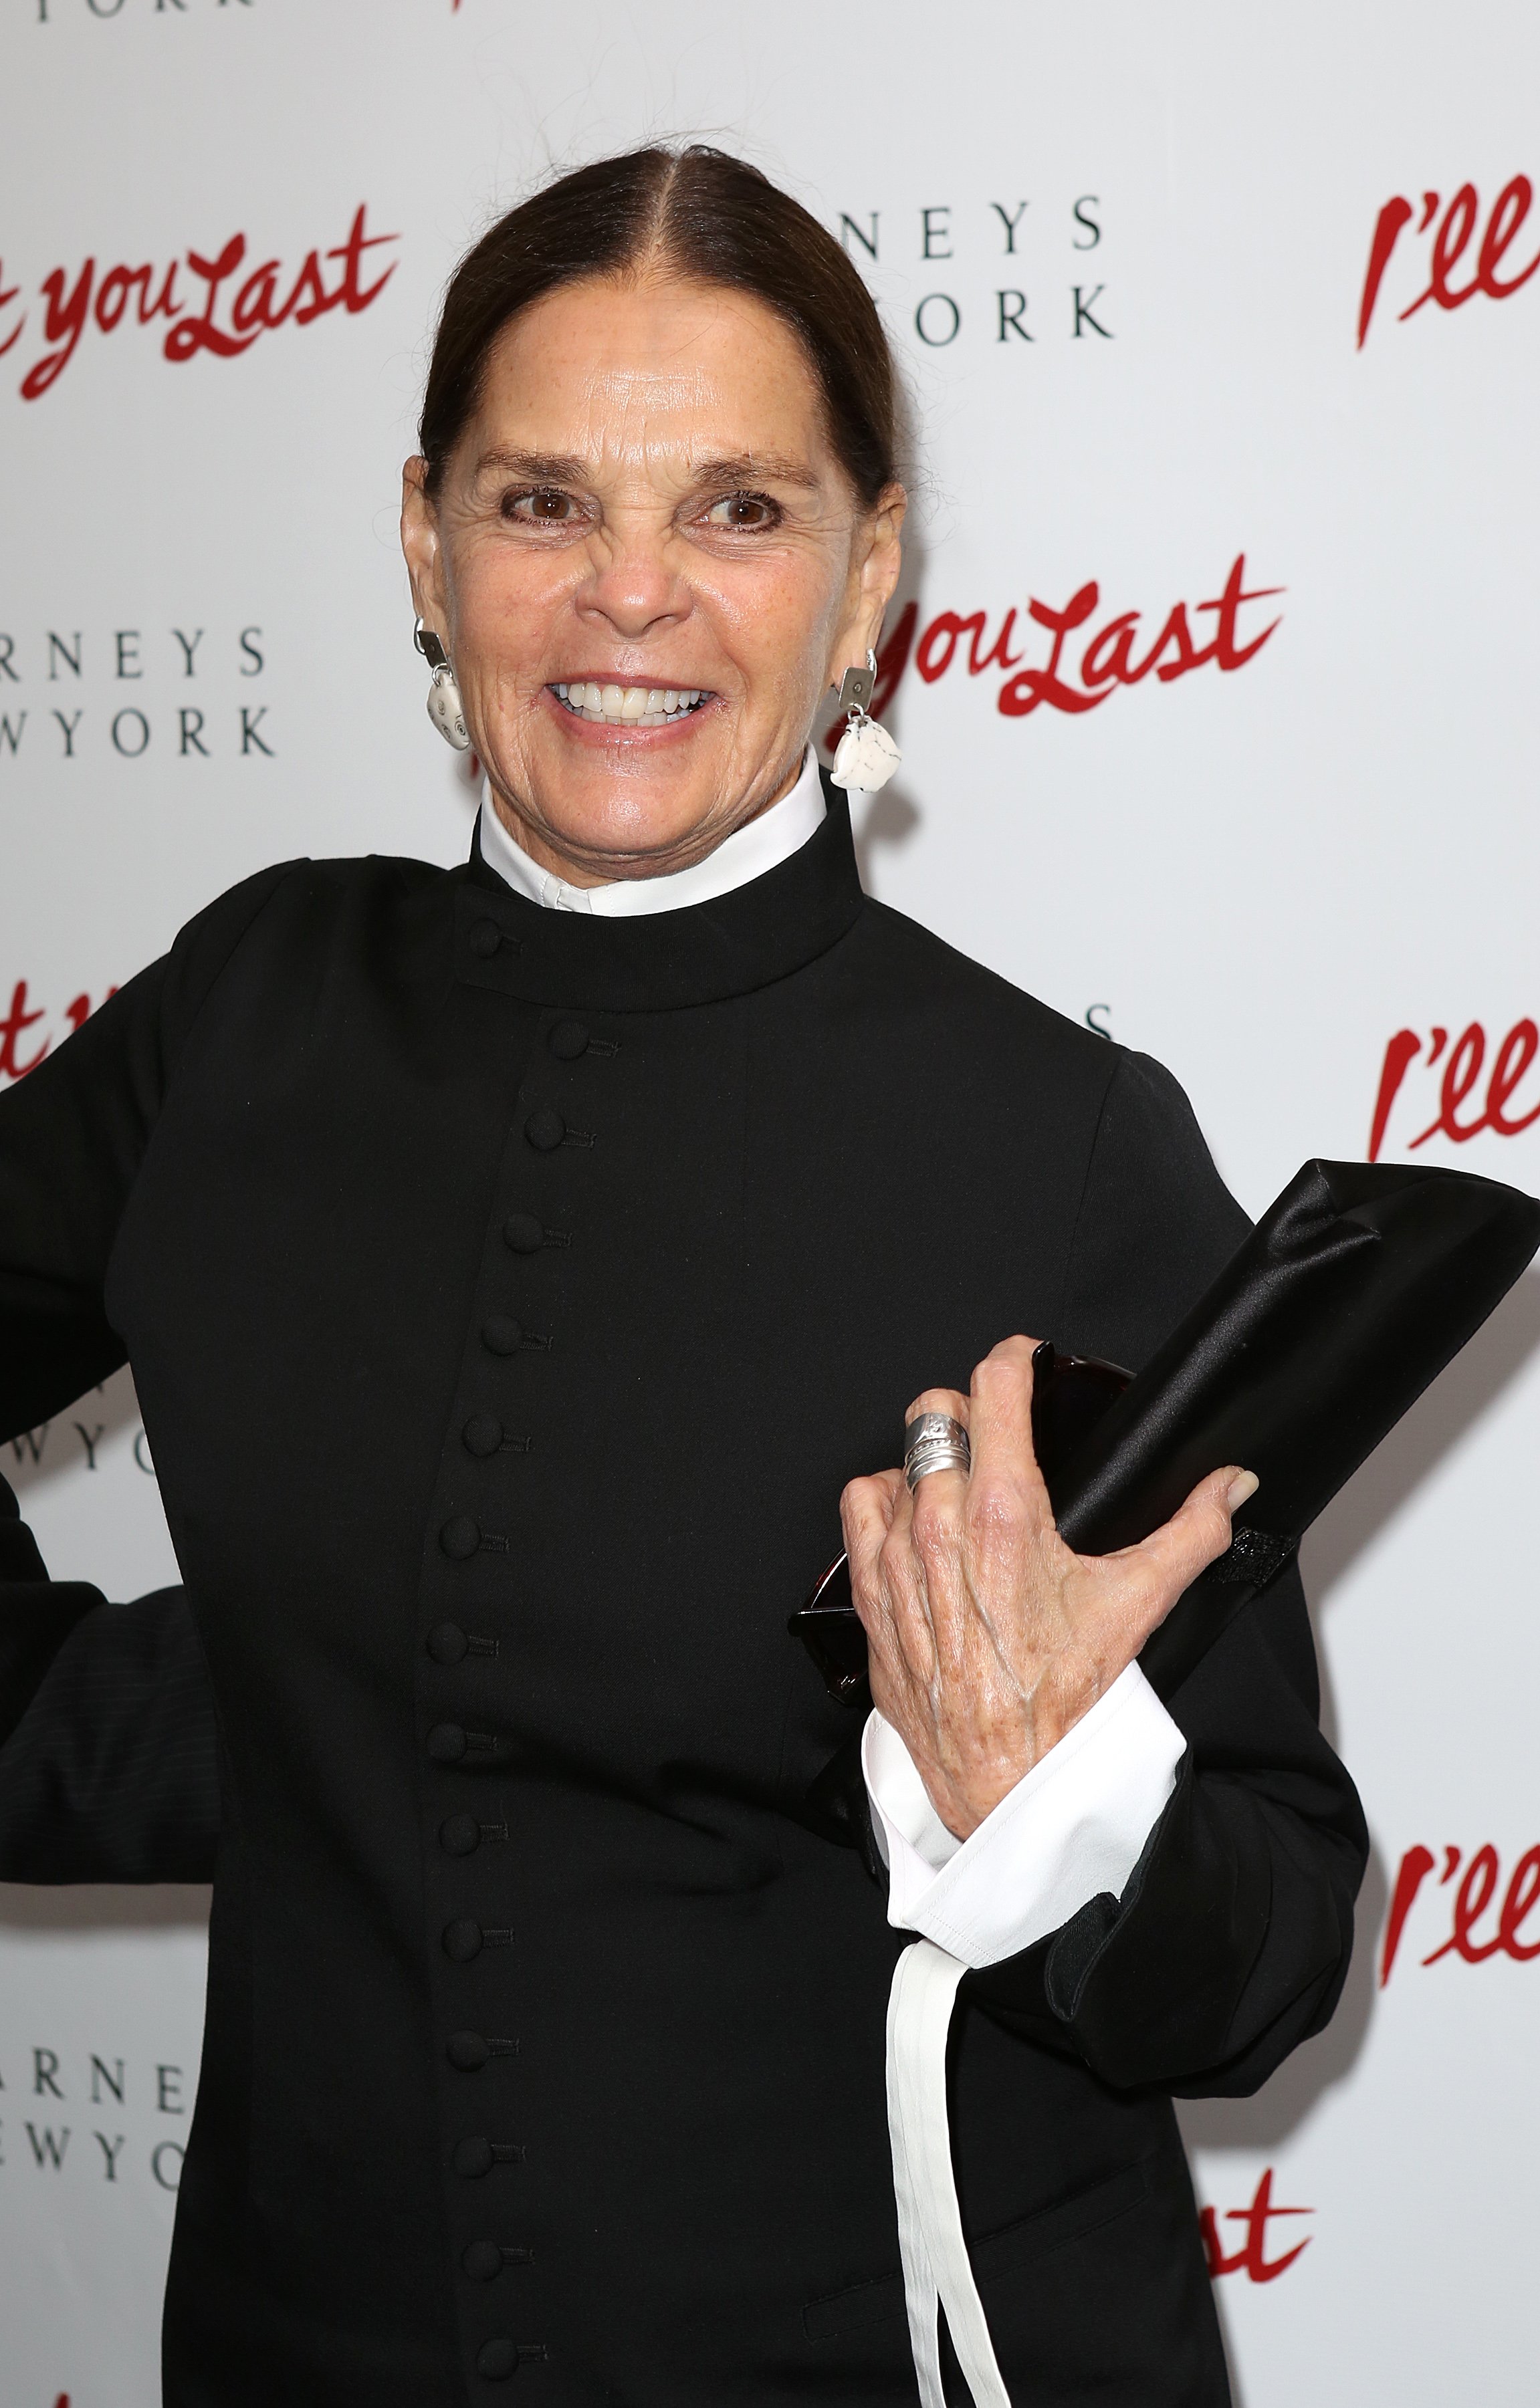 Ali MacGraw in New York City on April24, 2013. | Source: Getty Images